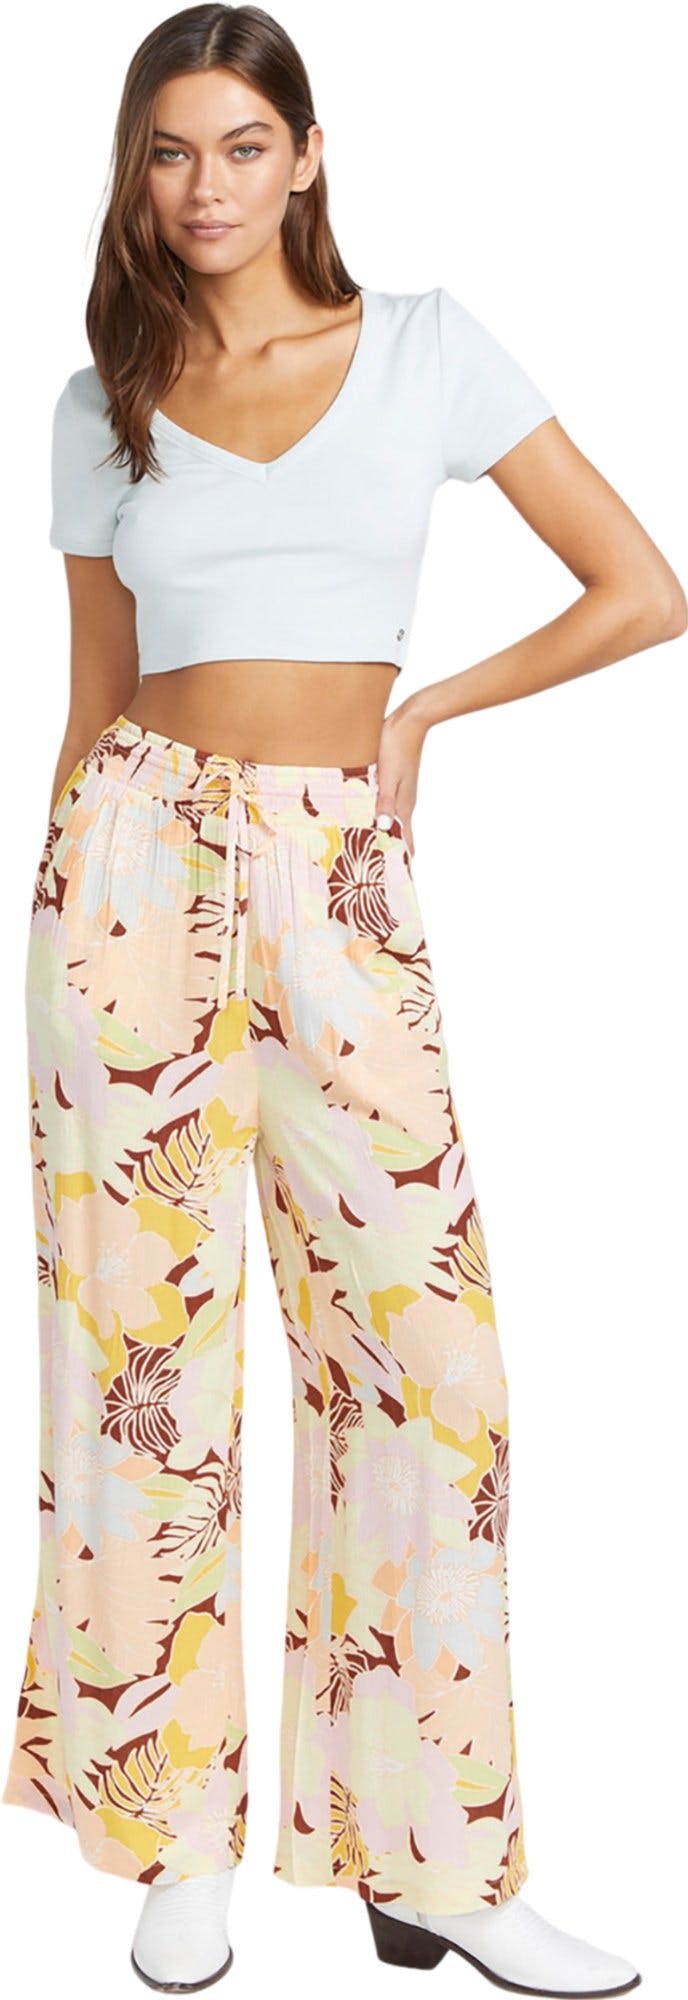 Product image for Oh Lei Pant - Women's